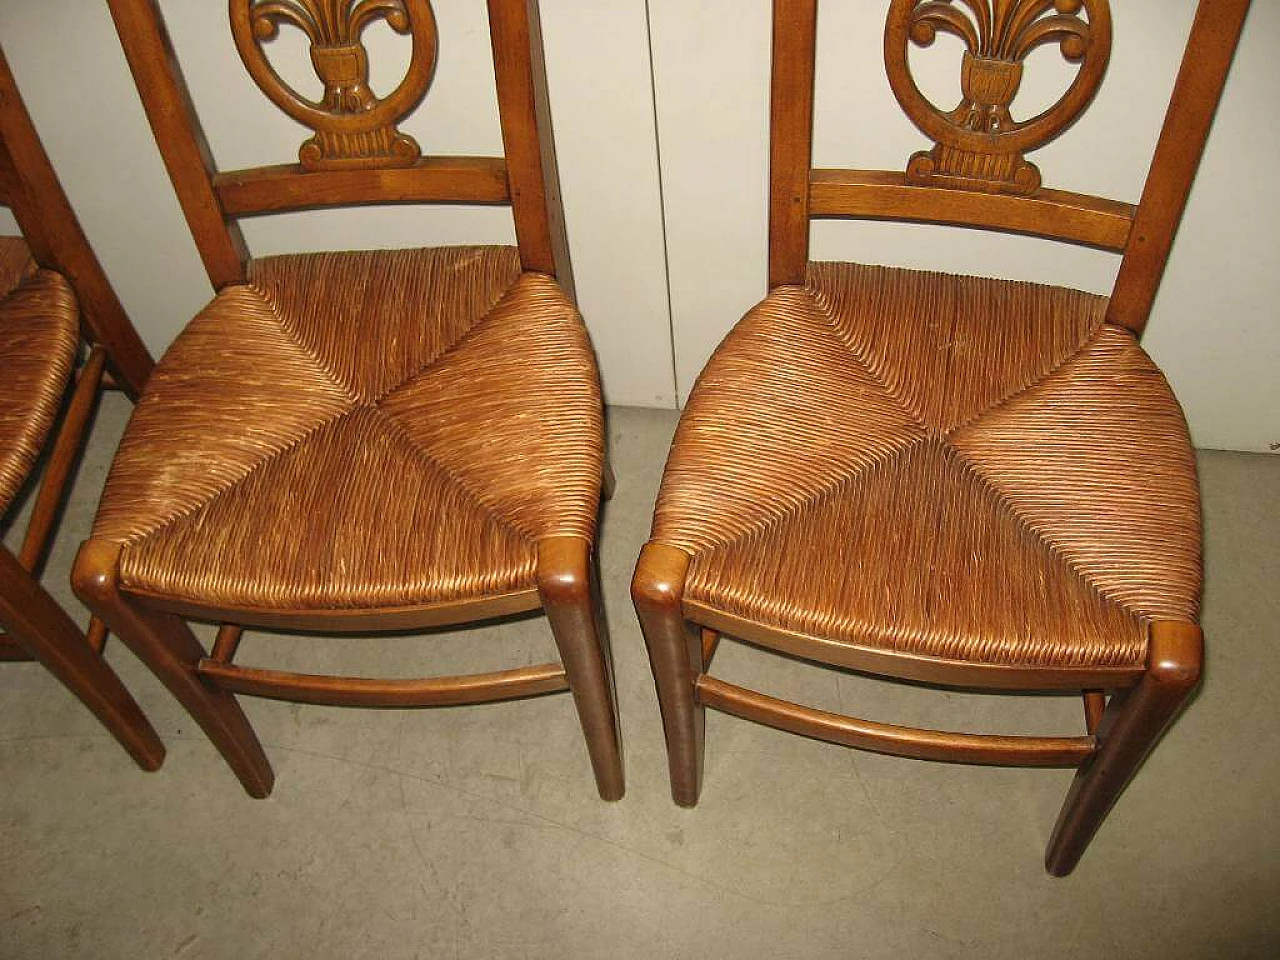 4 Walnut chairs with straw seat, early 2000s 1253818